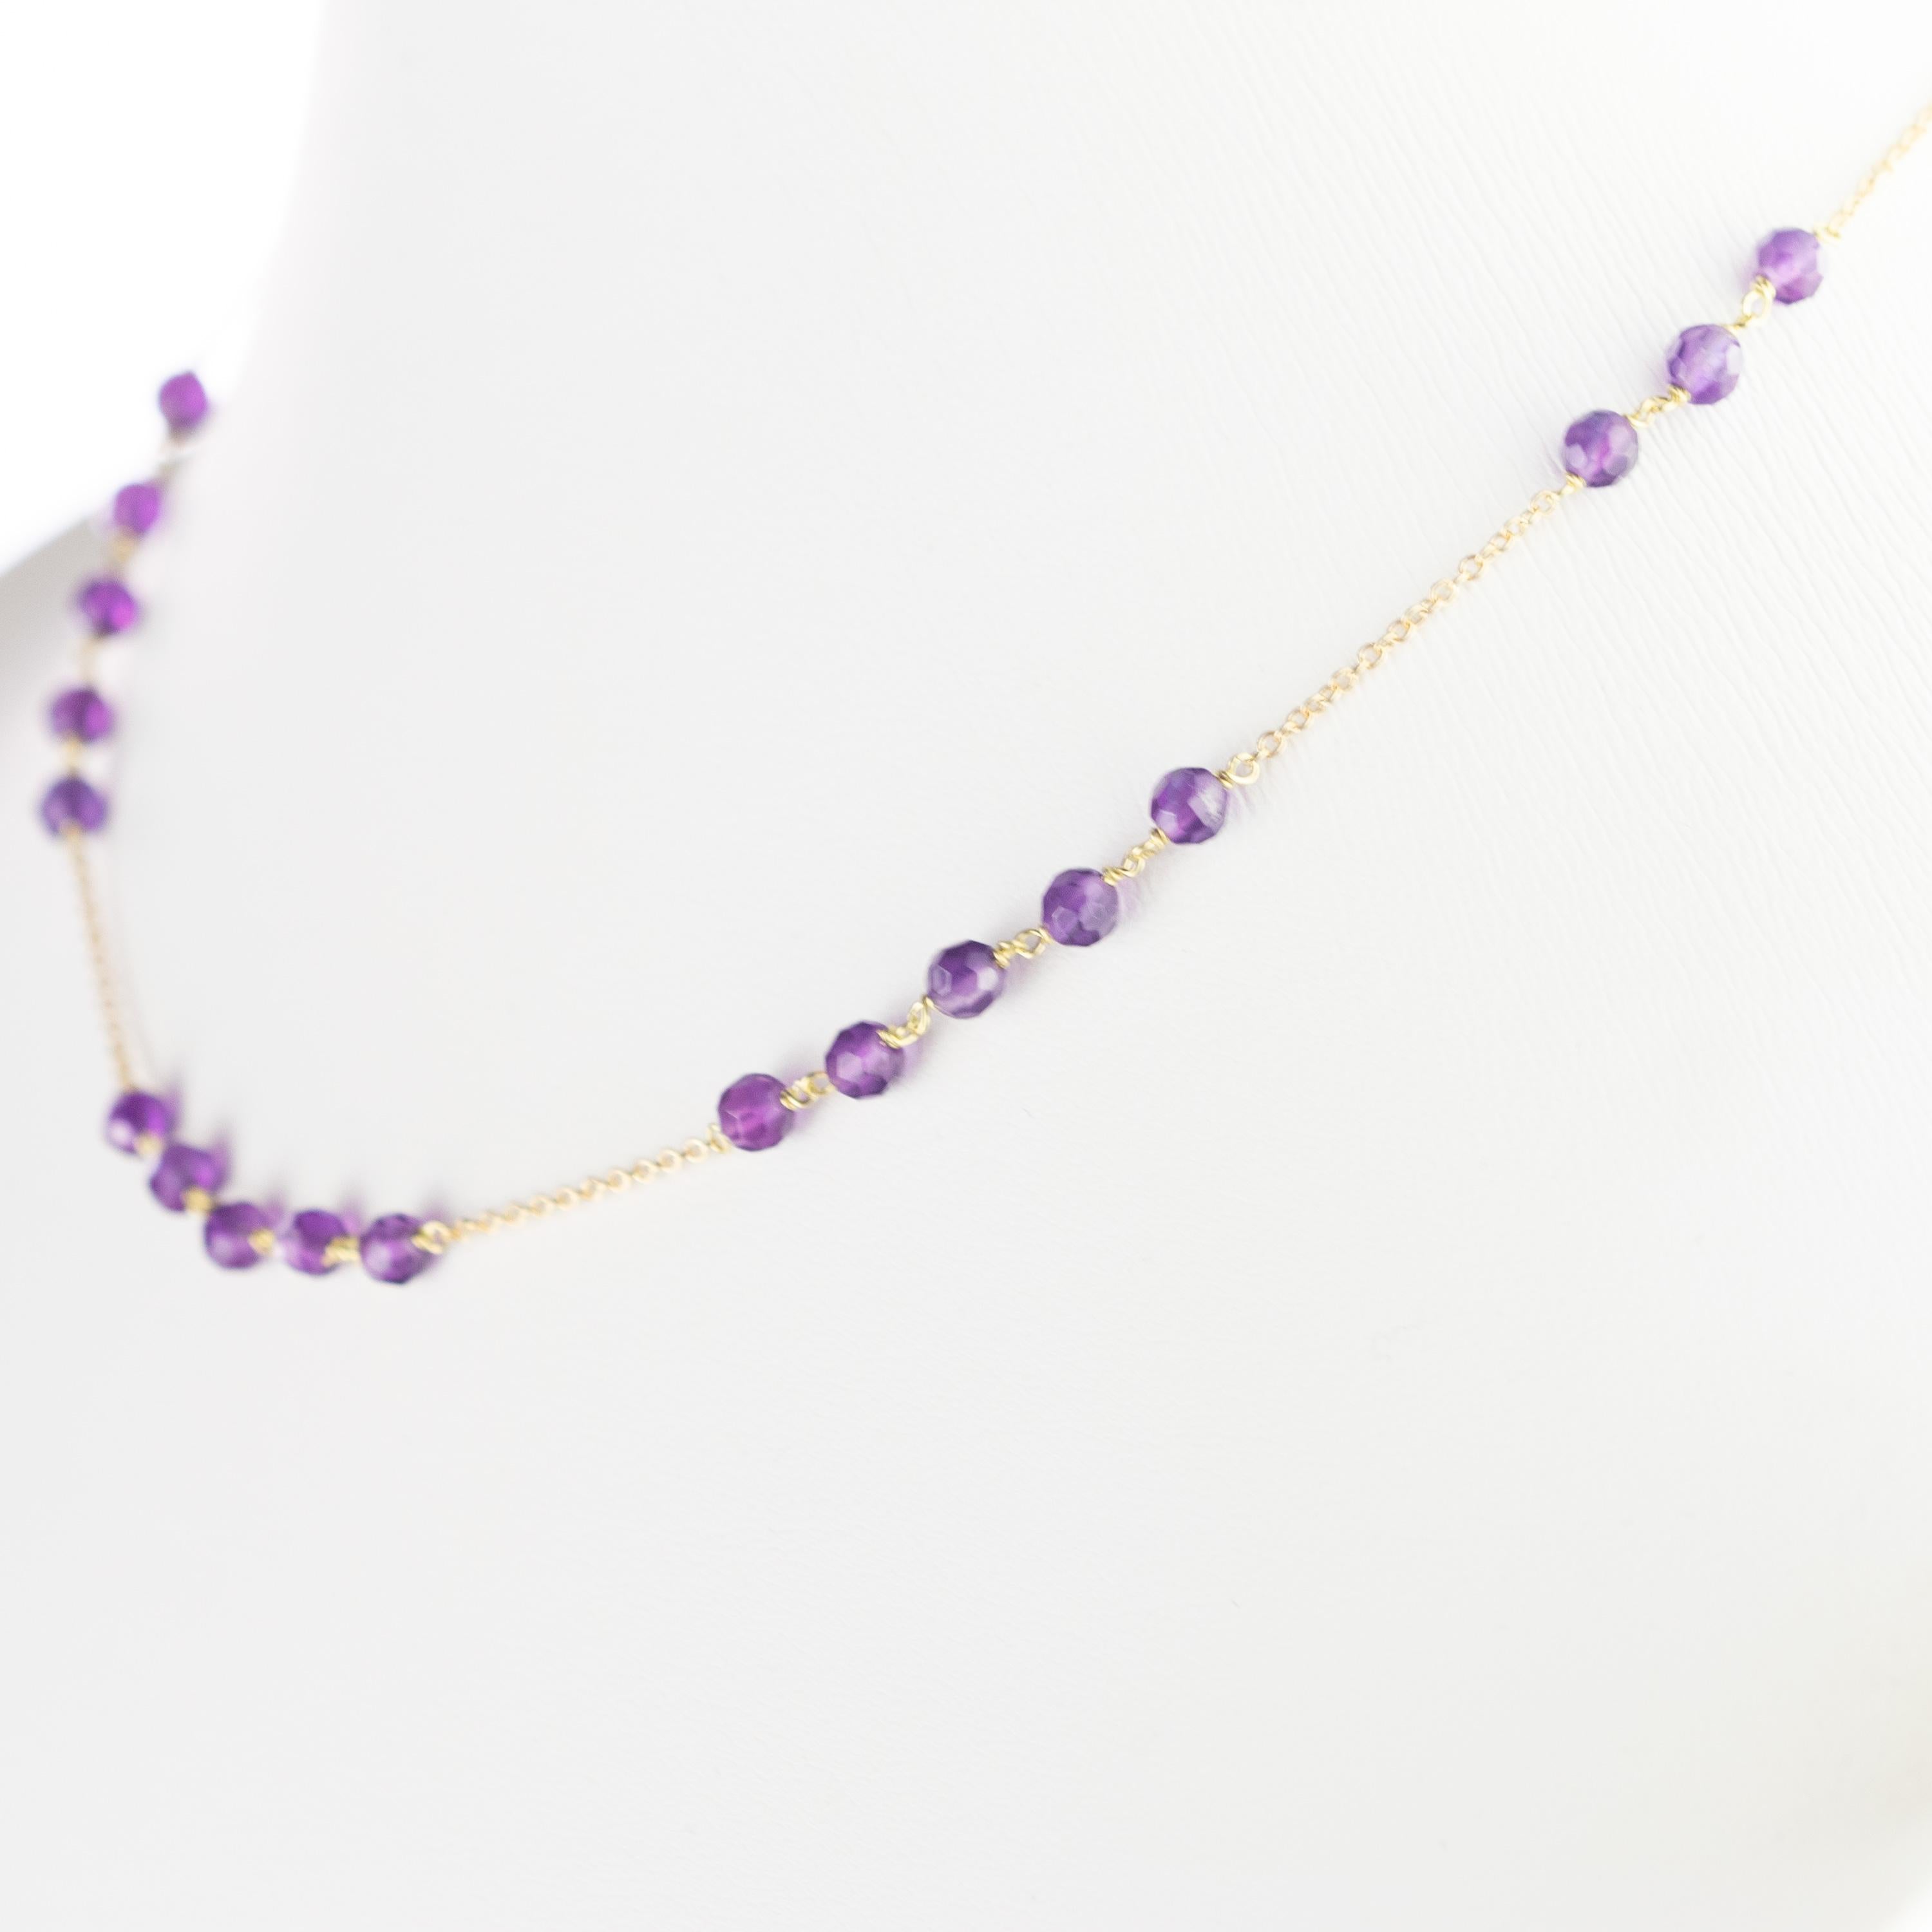 Amethyst Rondelles 9 Karat Yellow Gold Chain Handmade Cocktail Chic Necklace In New Condition For Sale In Milano, IT